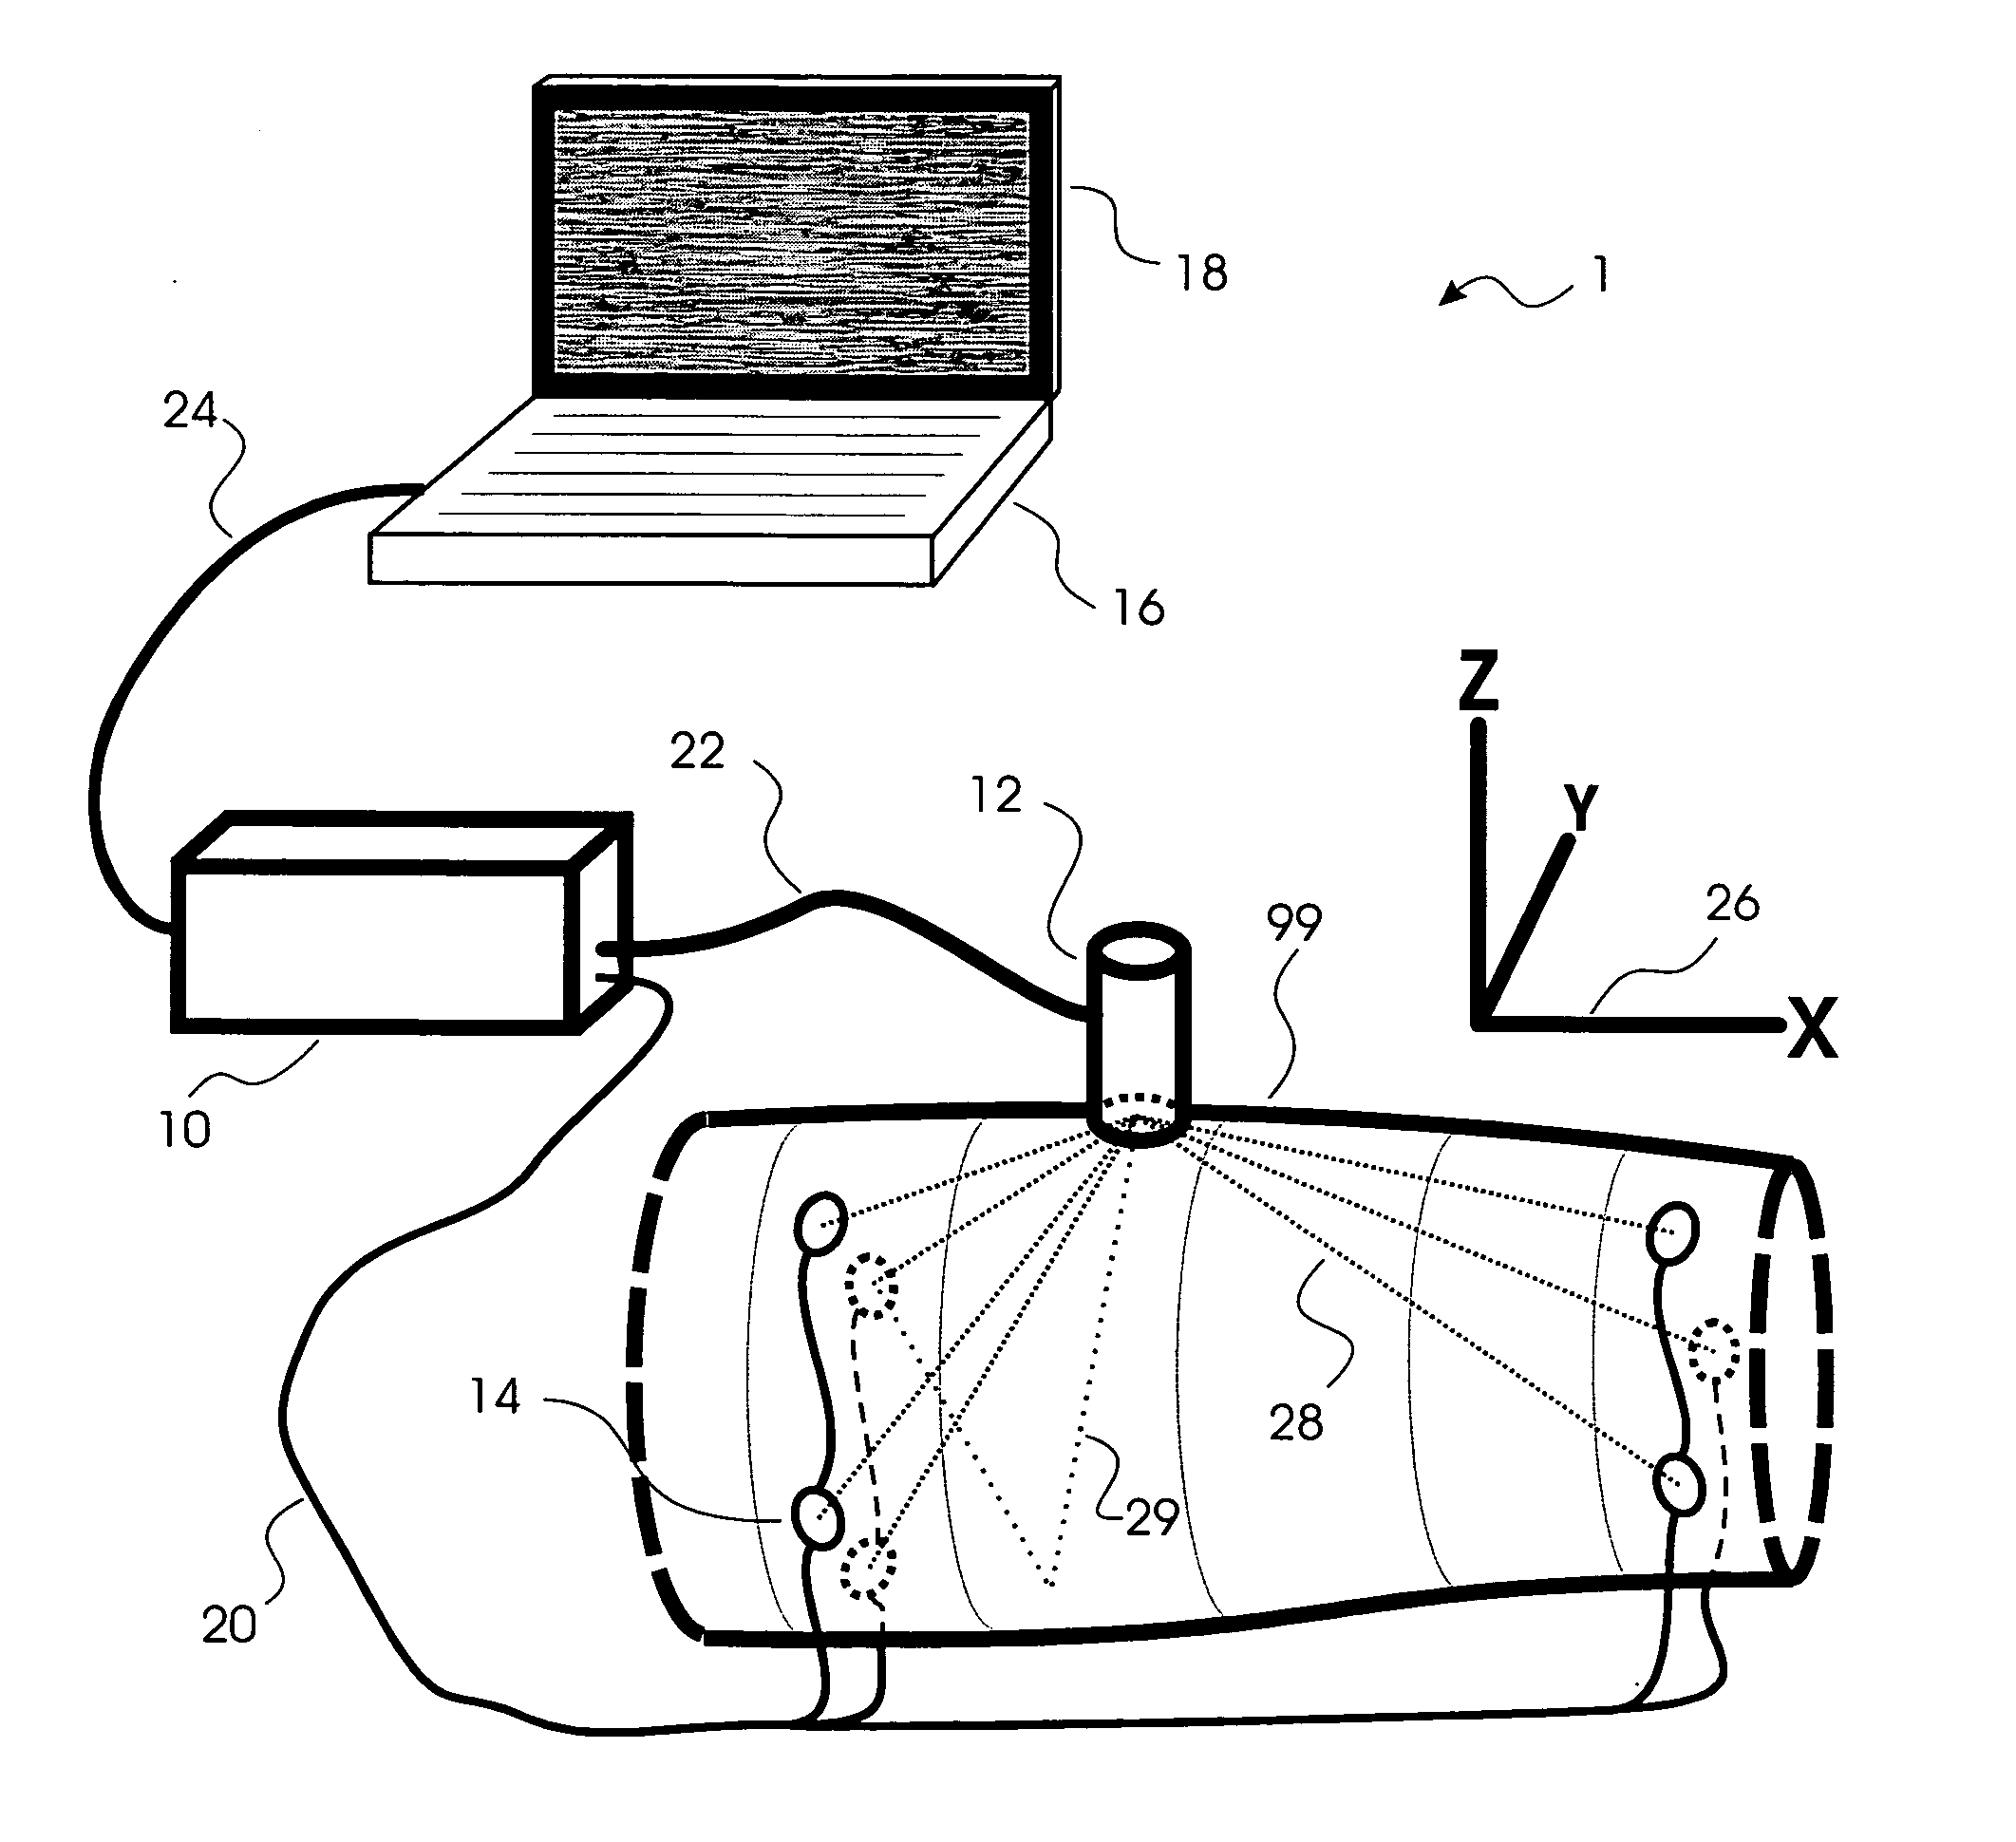 Method and system for measuring attributes on a three-dimenslonal object